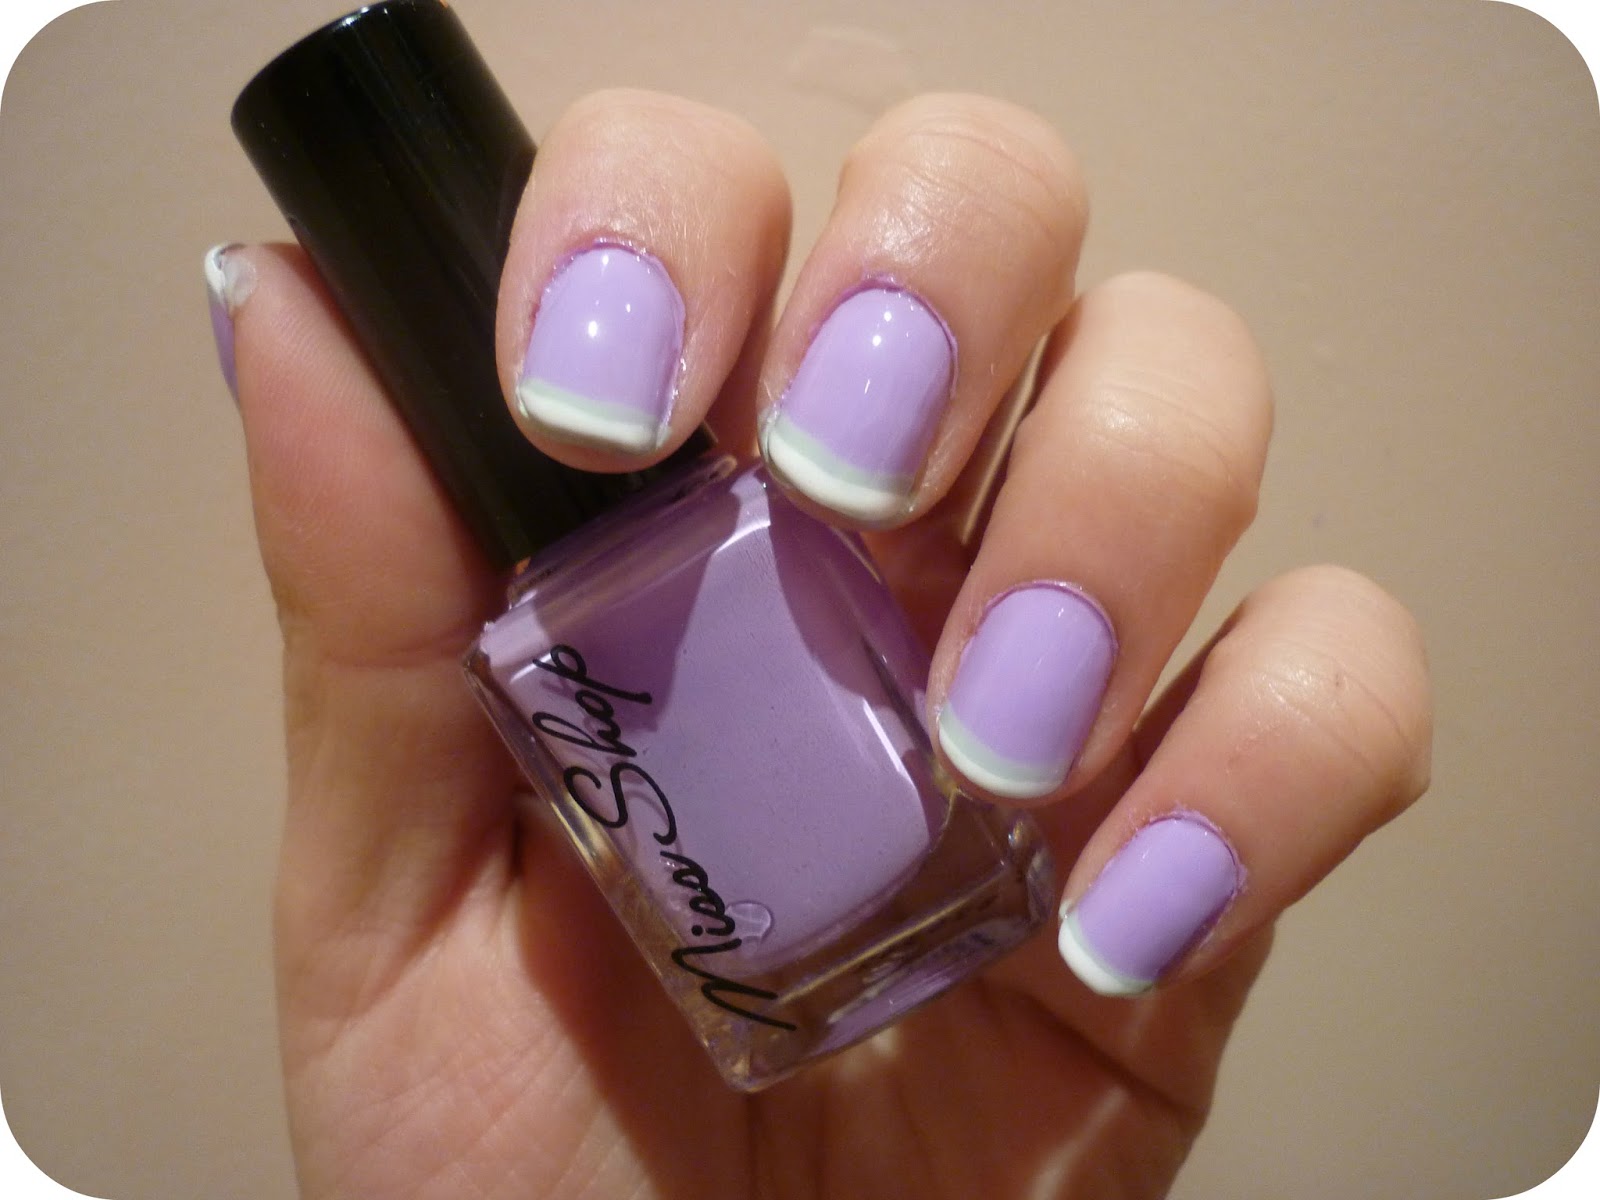 10. French Nail Art with Ombre - wide 2